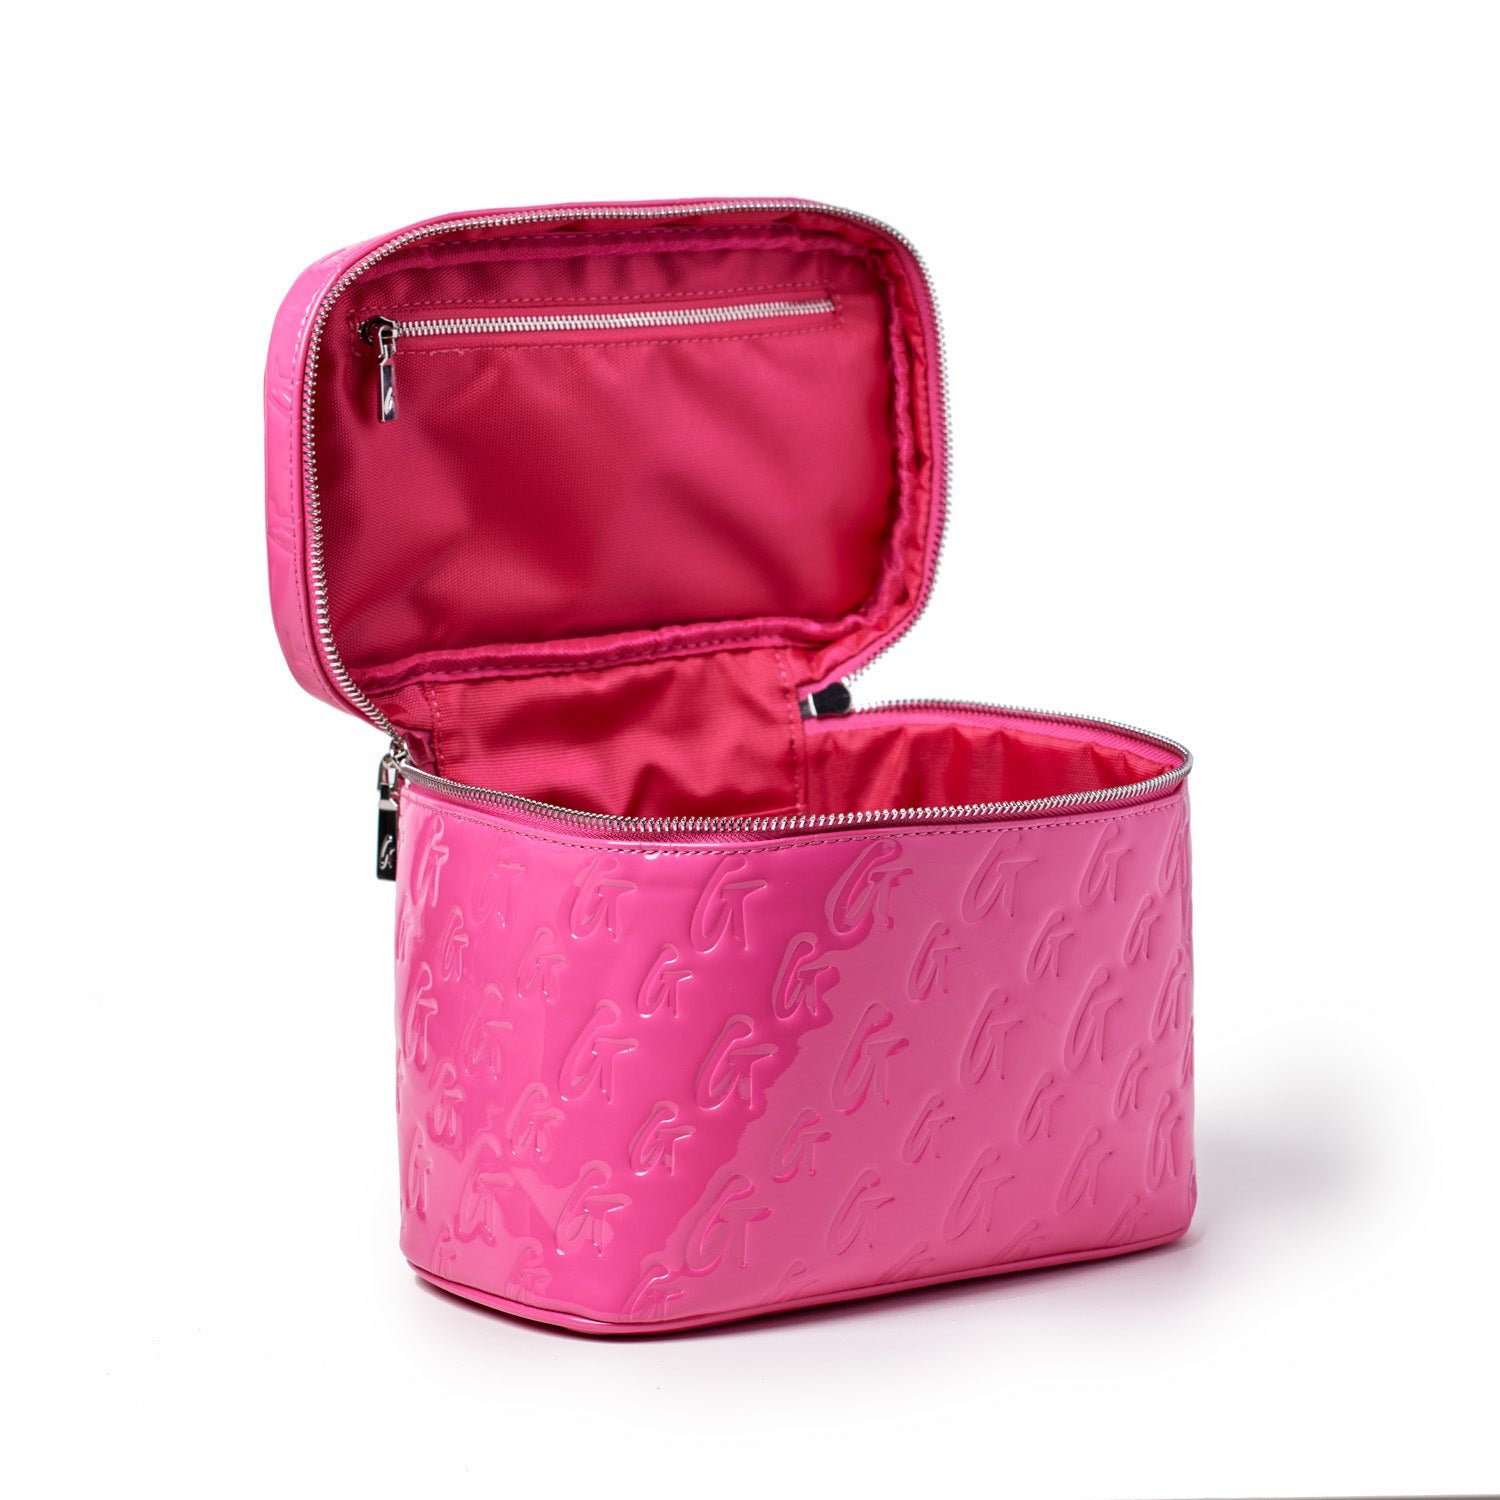 MONOGRAM COSMETIC POUCH MIRROR HOT PINK – Glam-Aholic Lifestyle